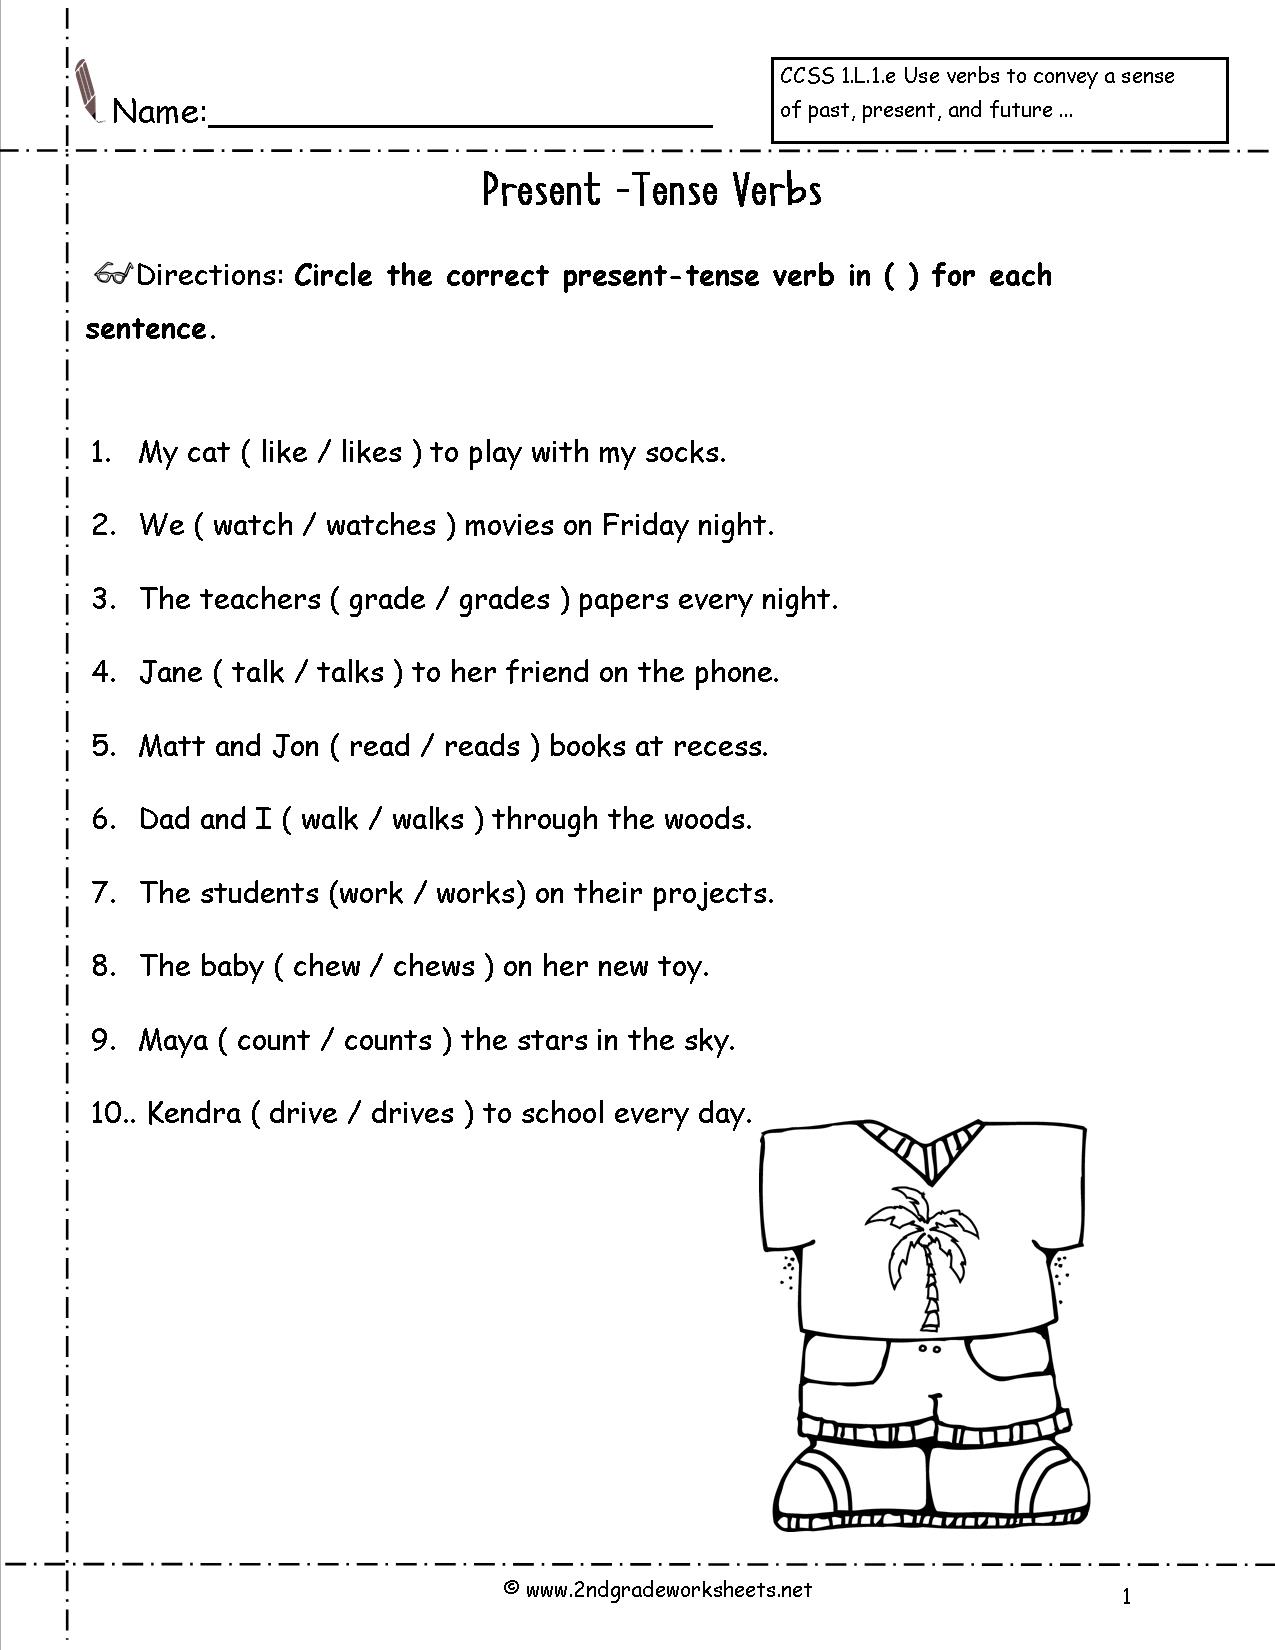 action-verbs-worksheets-for-1st-grade-your-home-teacher